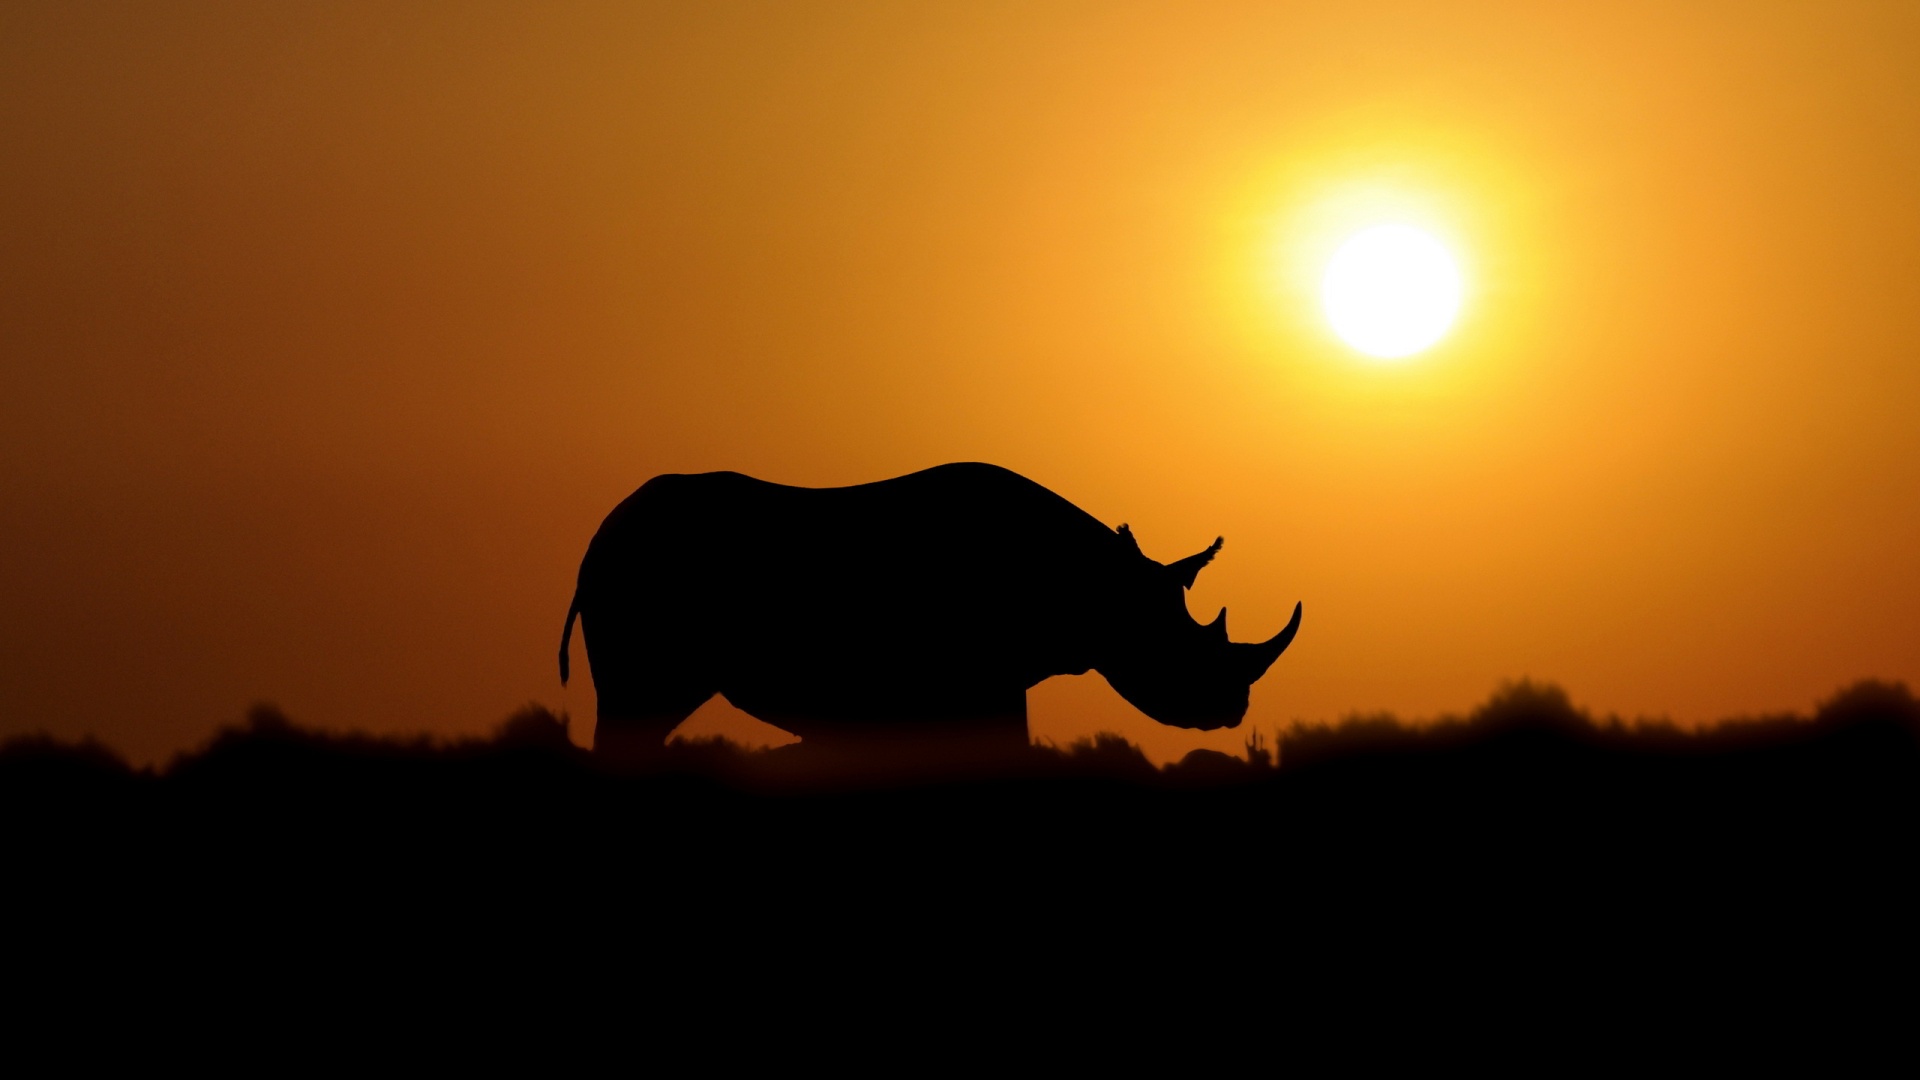 Sunset Rhino Wallpaper For Android 10 Wallpaper - Rhinoceros Wallpaper Hd , HD Wallpaper & Backgrounds